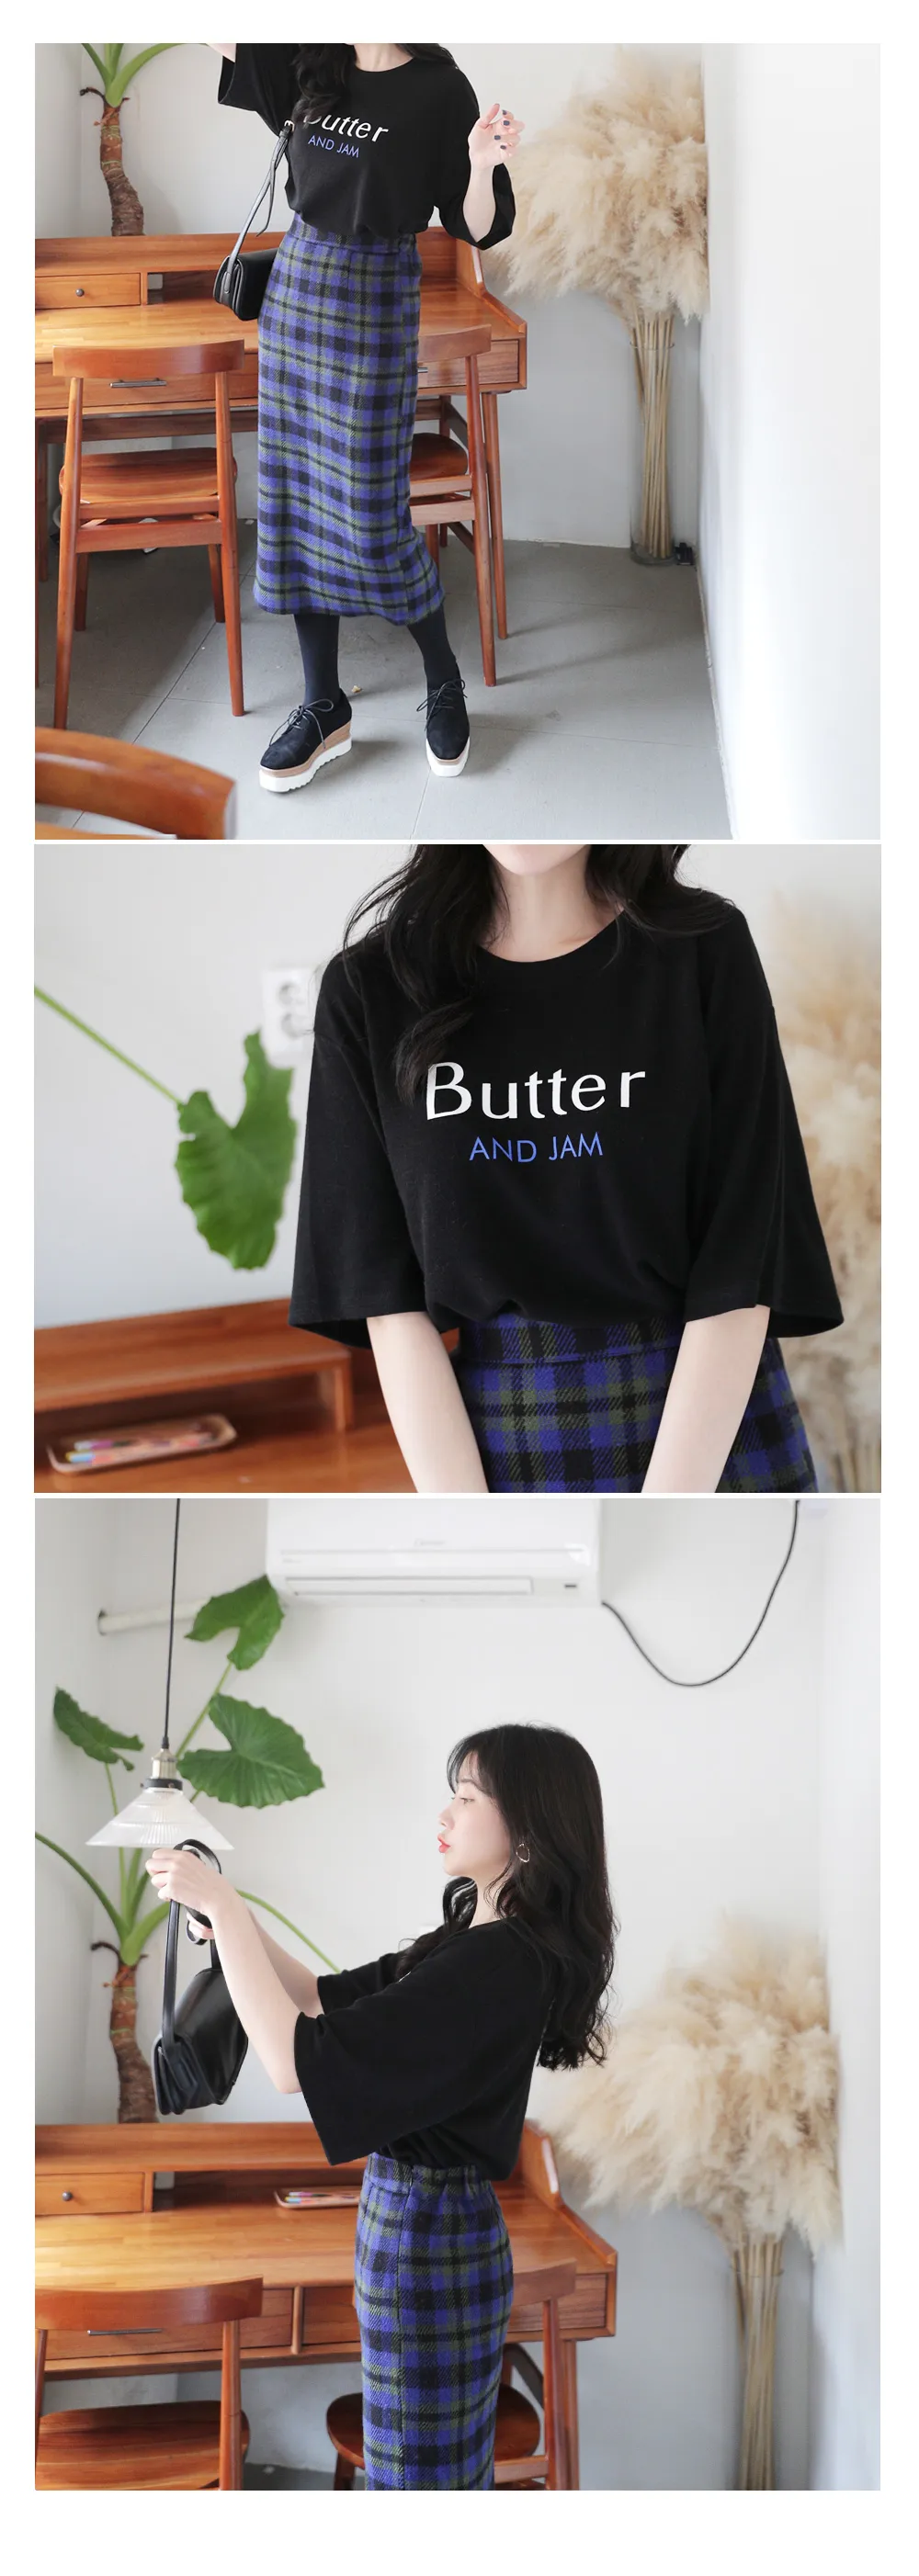 Butter AND JAMルーズTシャツ・全2色 | DHOLIC | 詳細画像4